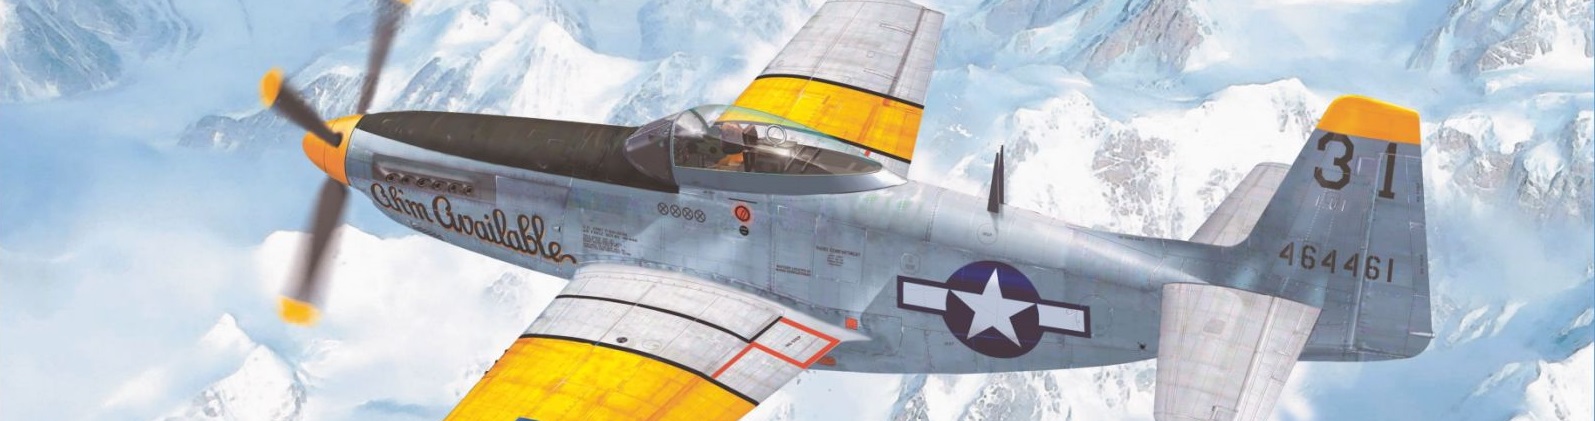 The new P-51H "Mustang" (1/48) is already here!!!